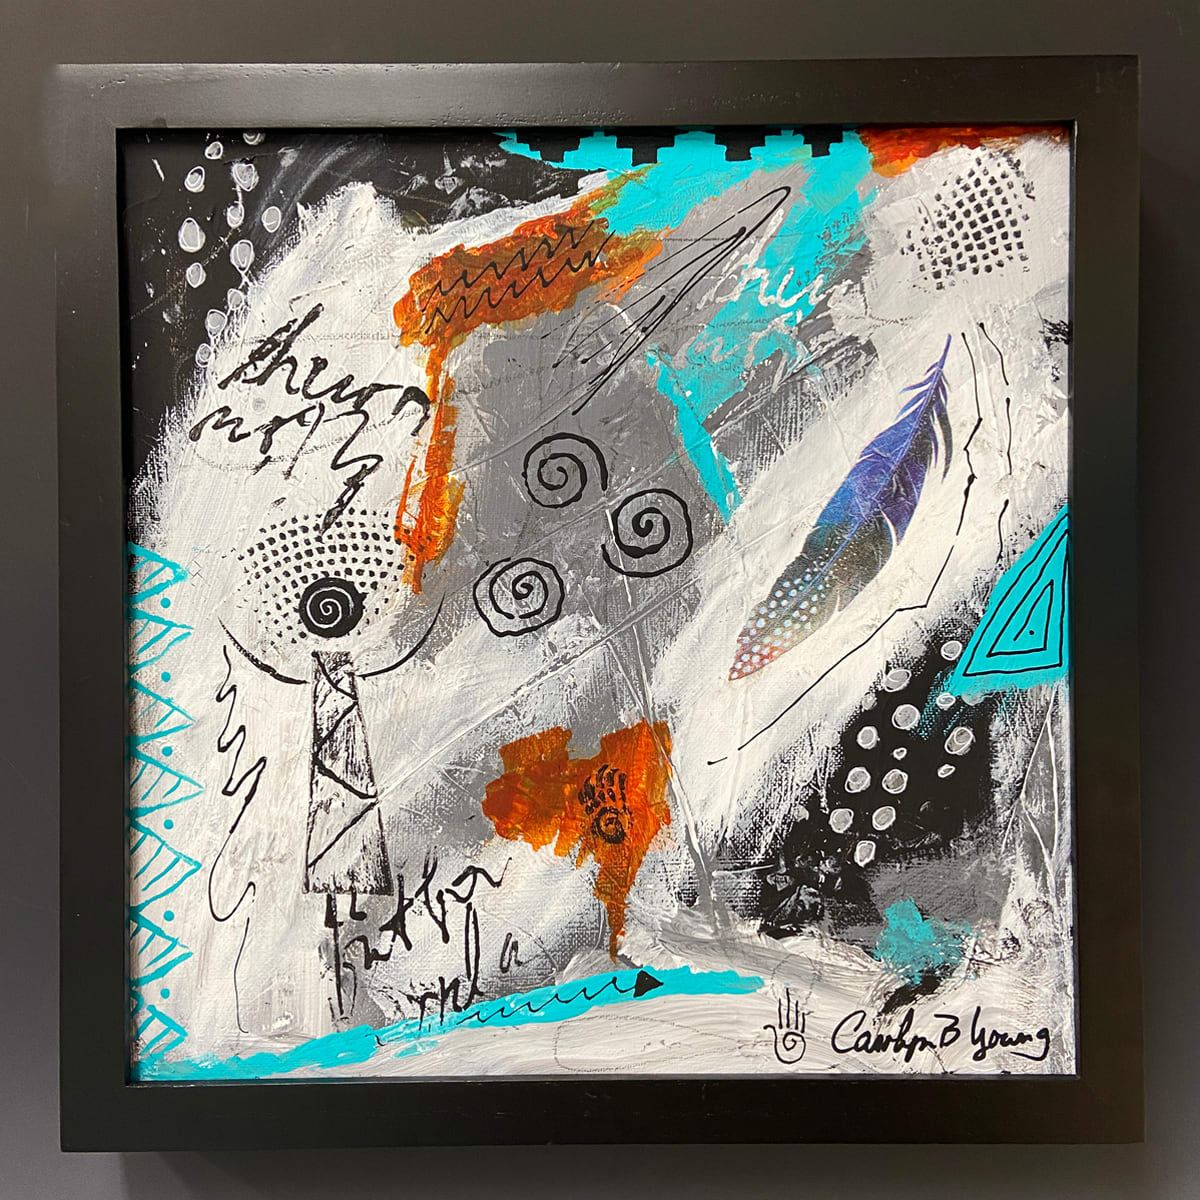 Her Wildest Dream Came True  Image: © Carolyn Bernard Young, Her Wildest Dreams Came True, 12 x 12 x .5″ canvas, acrylics, inks, collage, charcoal; 13.5 x 13.5 x 1.5″ framed.